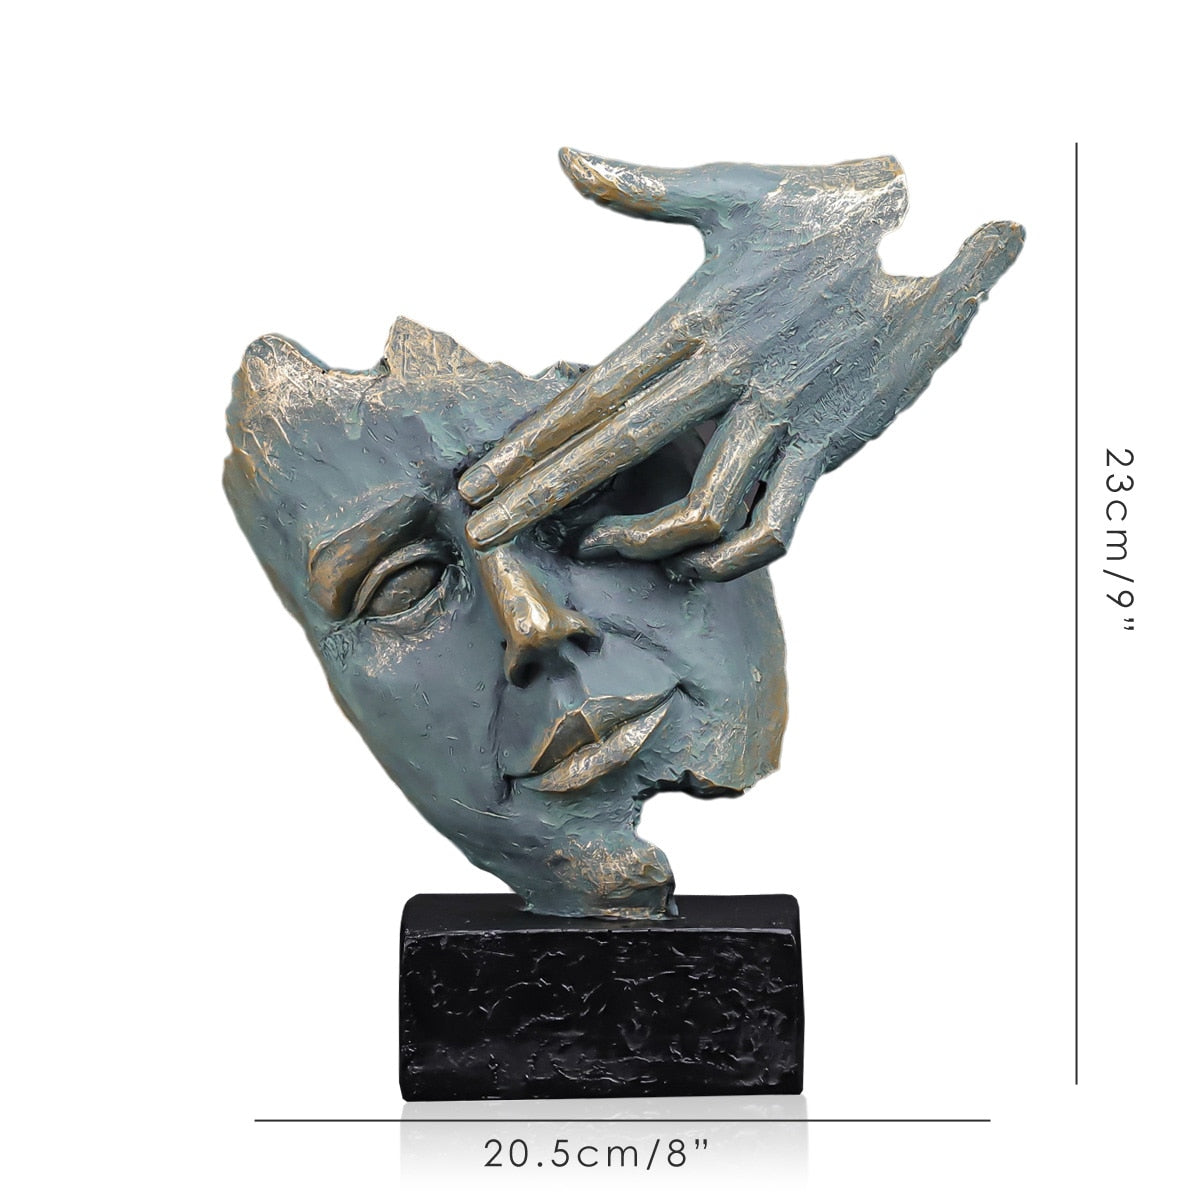 Abstract Character Art Collectible Sculpture Resin Thinker Figurine Face Statue Bookshelf Room Home Decoration Accessories New